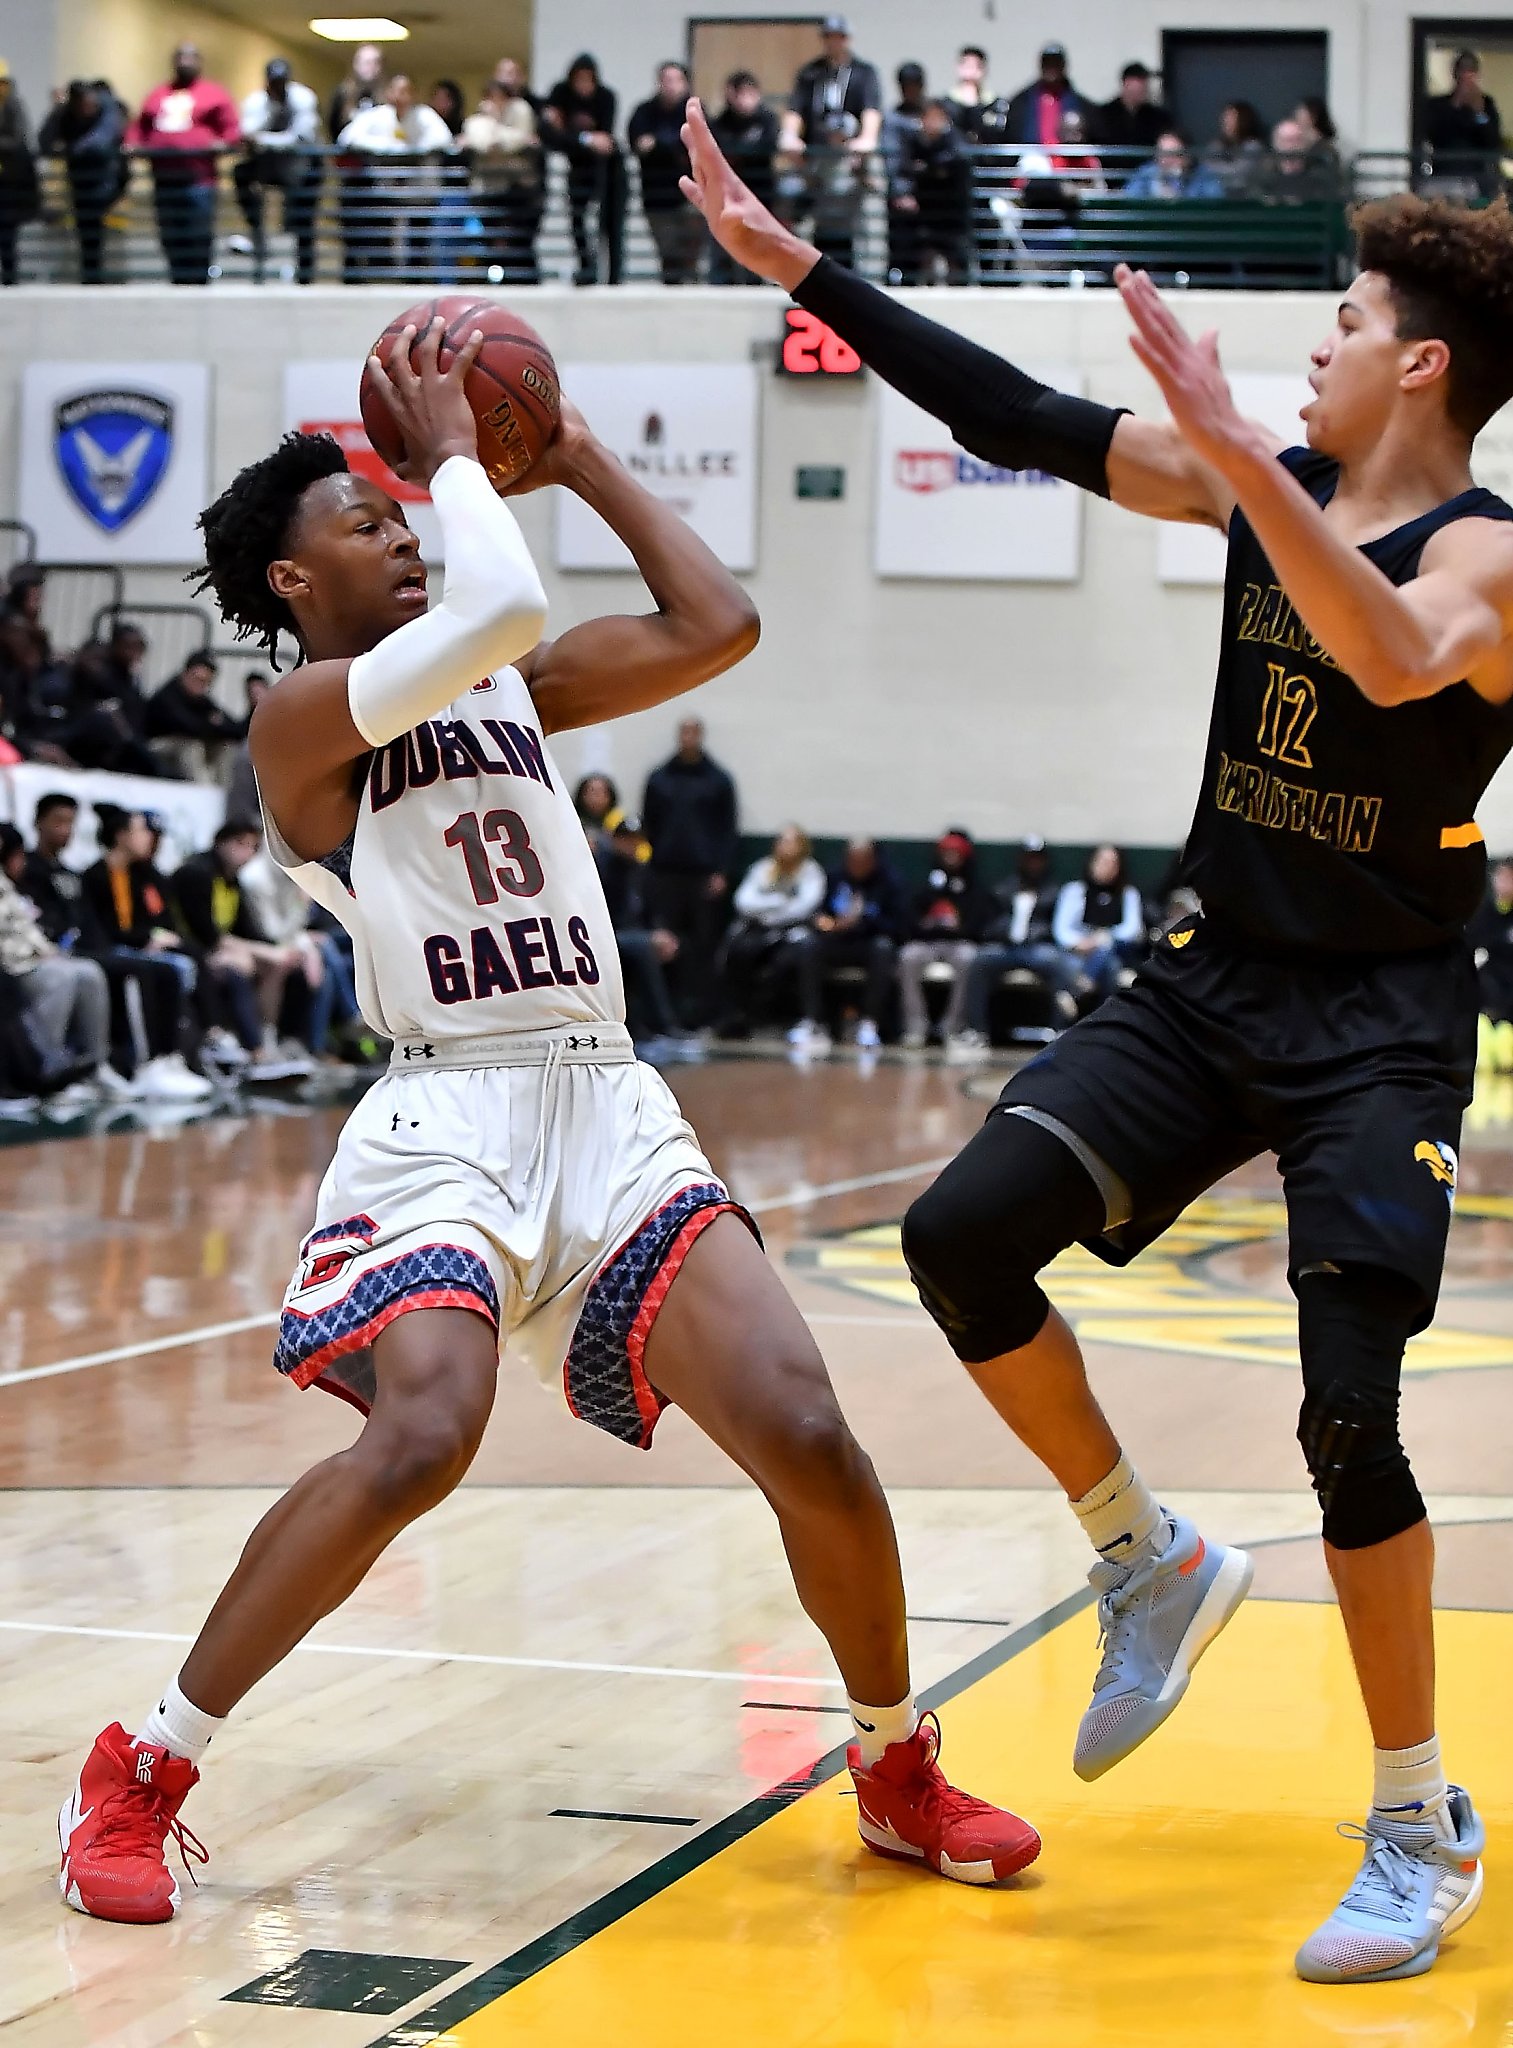 Quality opponents draw top high school basketball teams away from Bay Area